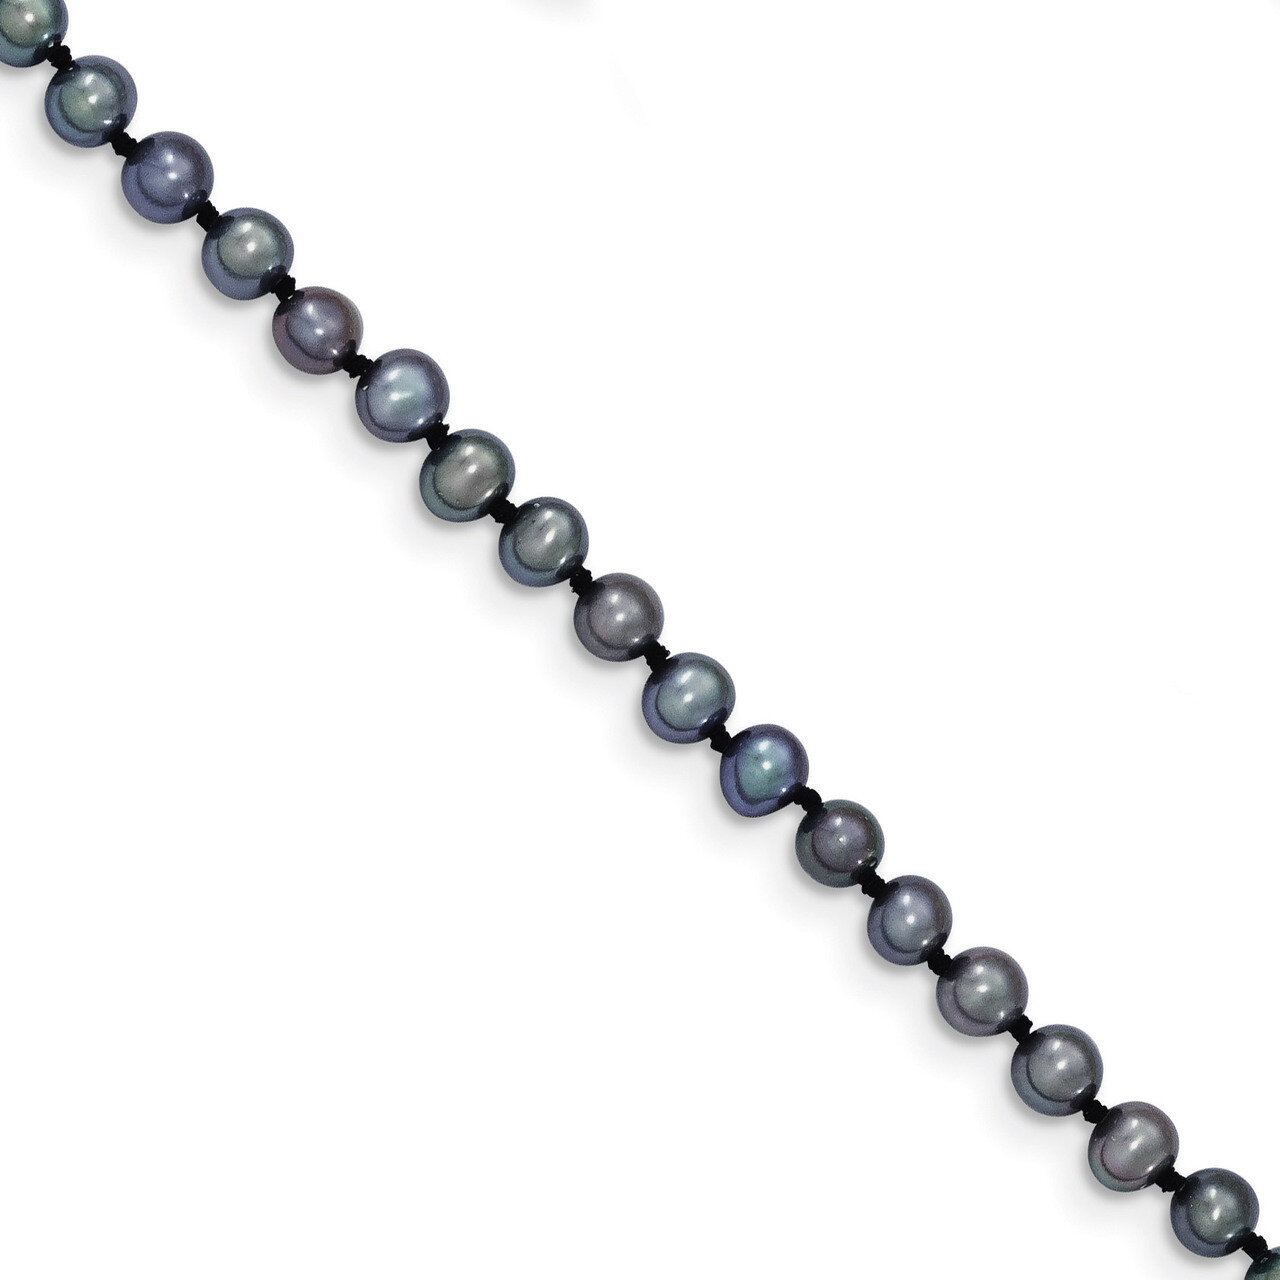 4-5mm Black Cultured Near Round Pearl Necklace 16 Inch 14k Gold BPN040-16